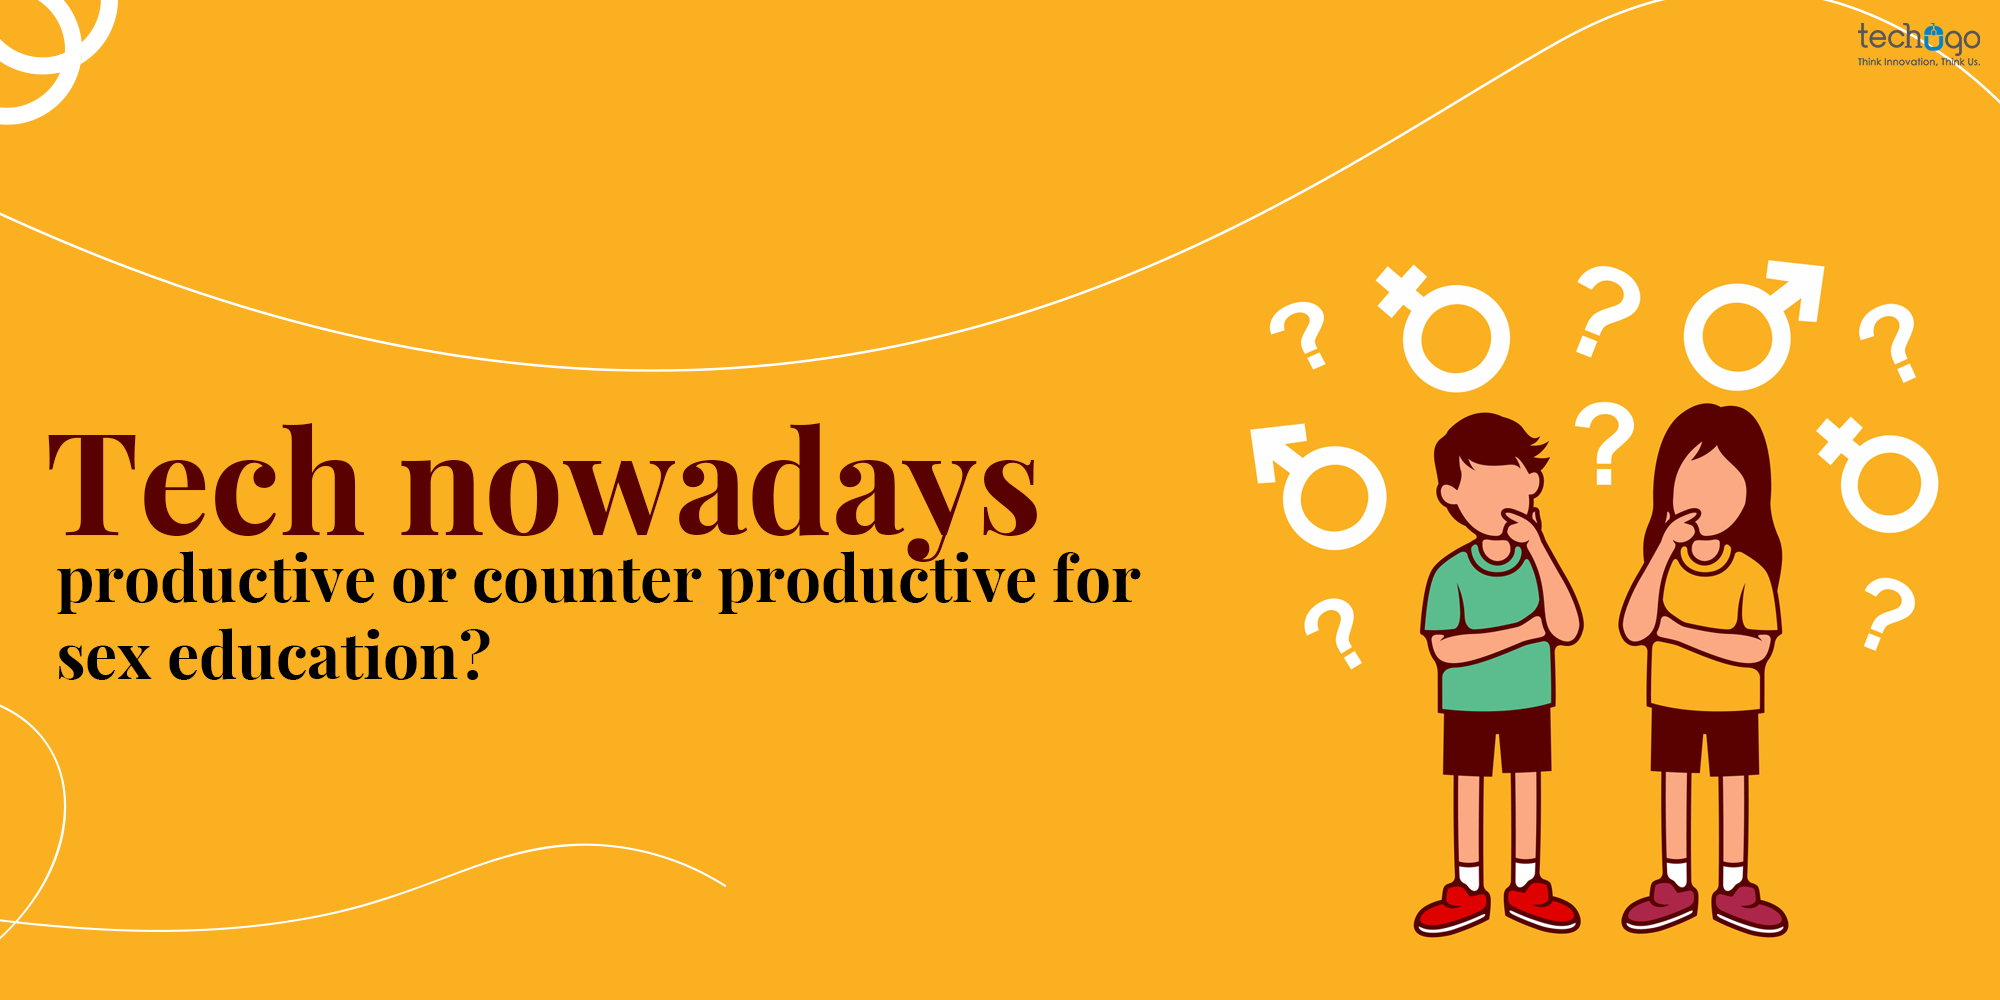 Tech nowadays – productive or counter-productive for sex education?